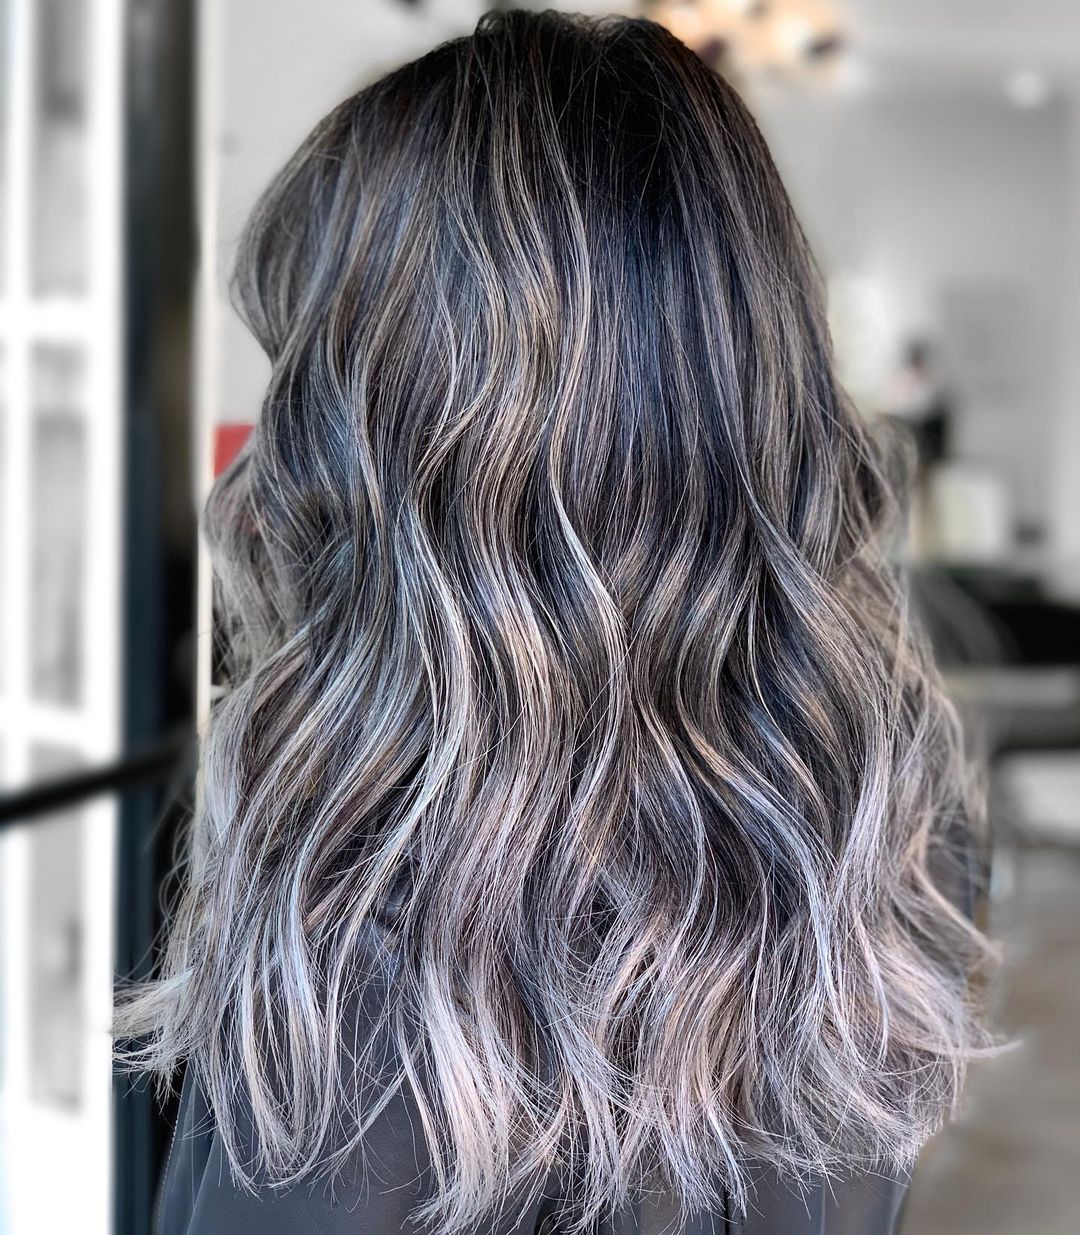 Amazing Silver Highlights on Black Hair